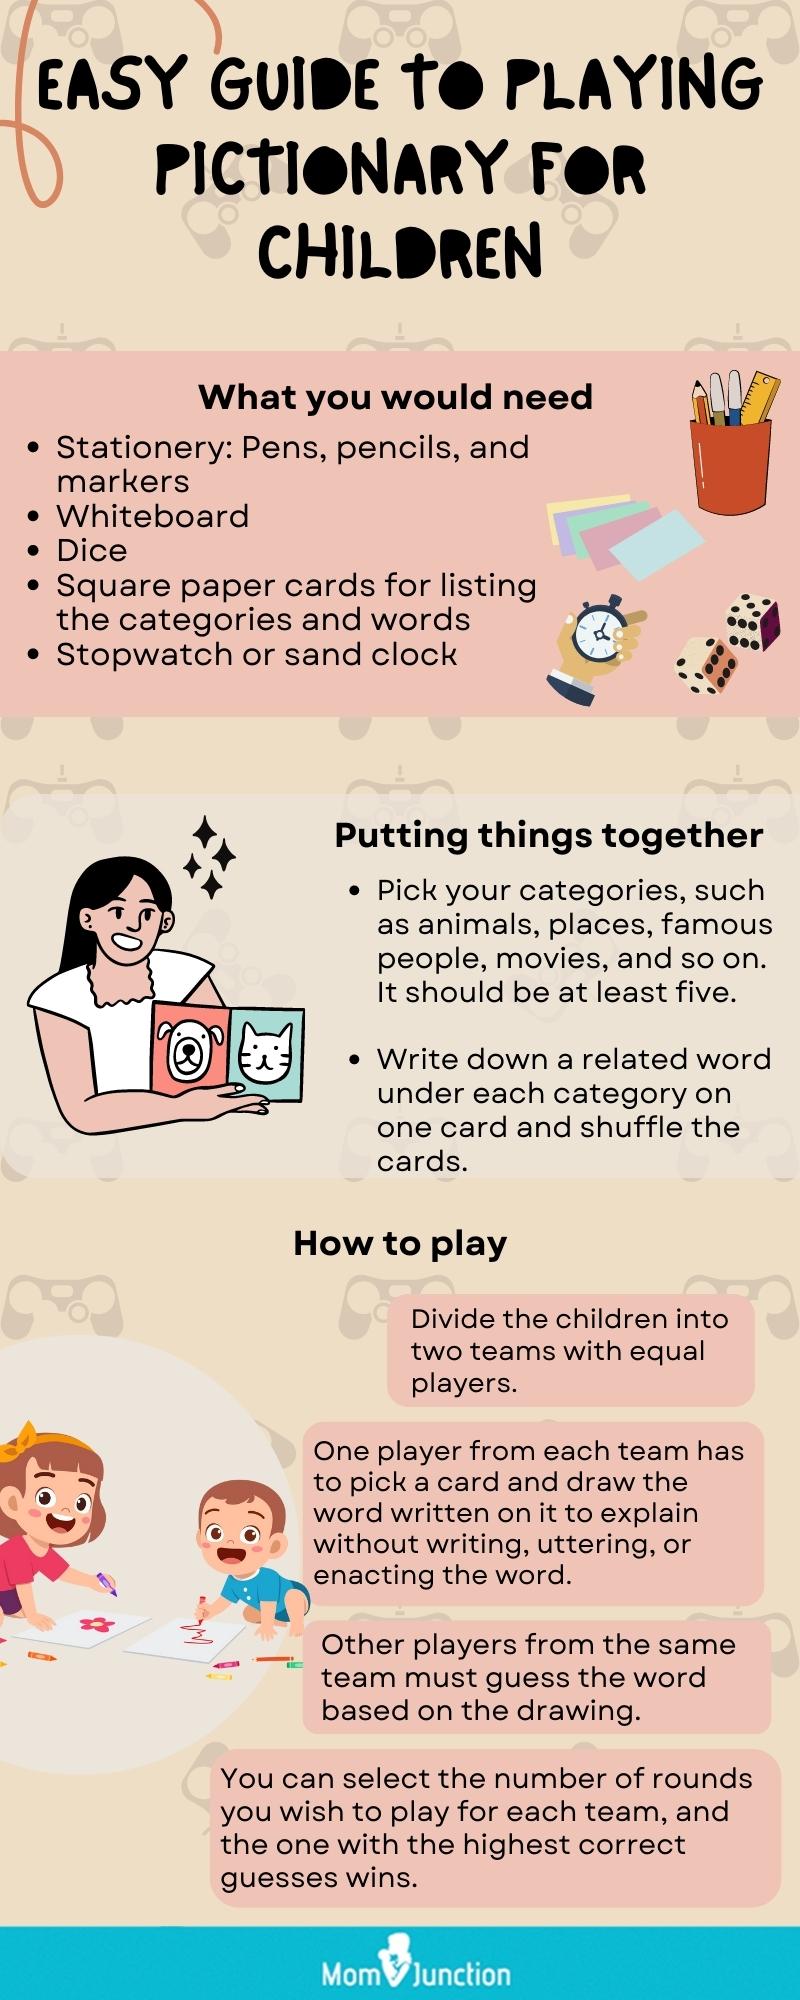 easy guide to playing pictionary for children (infographic)